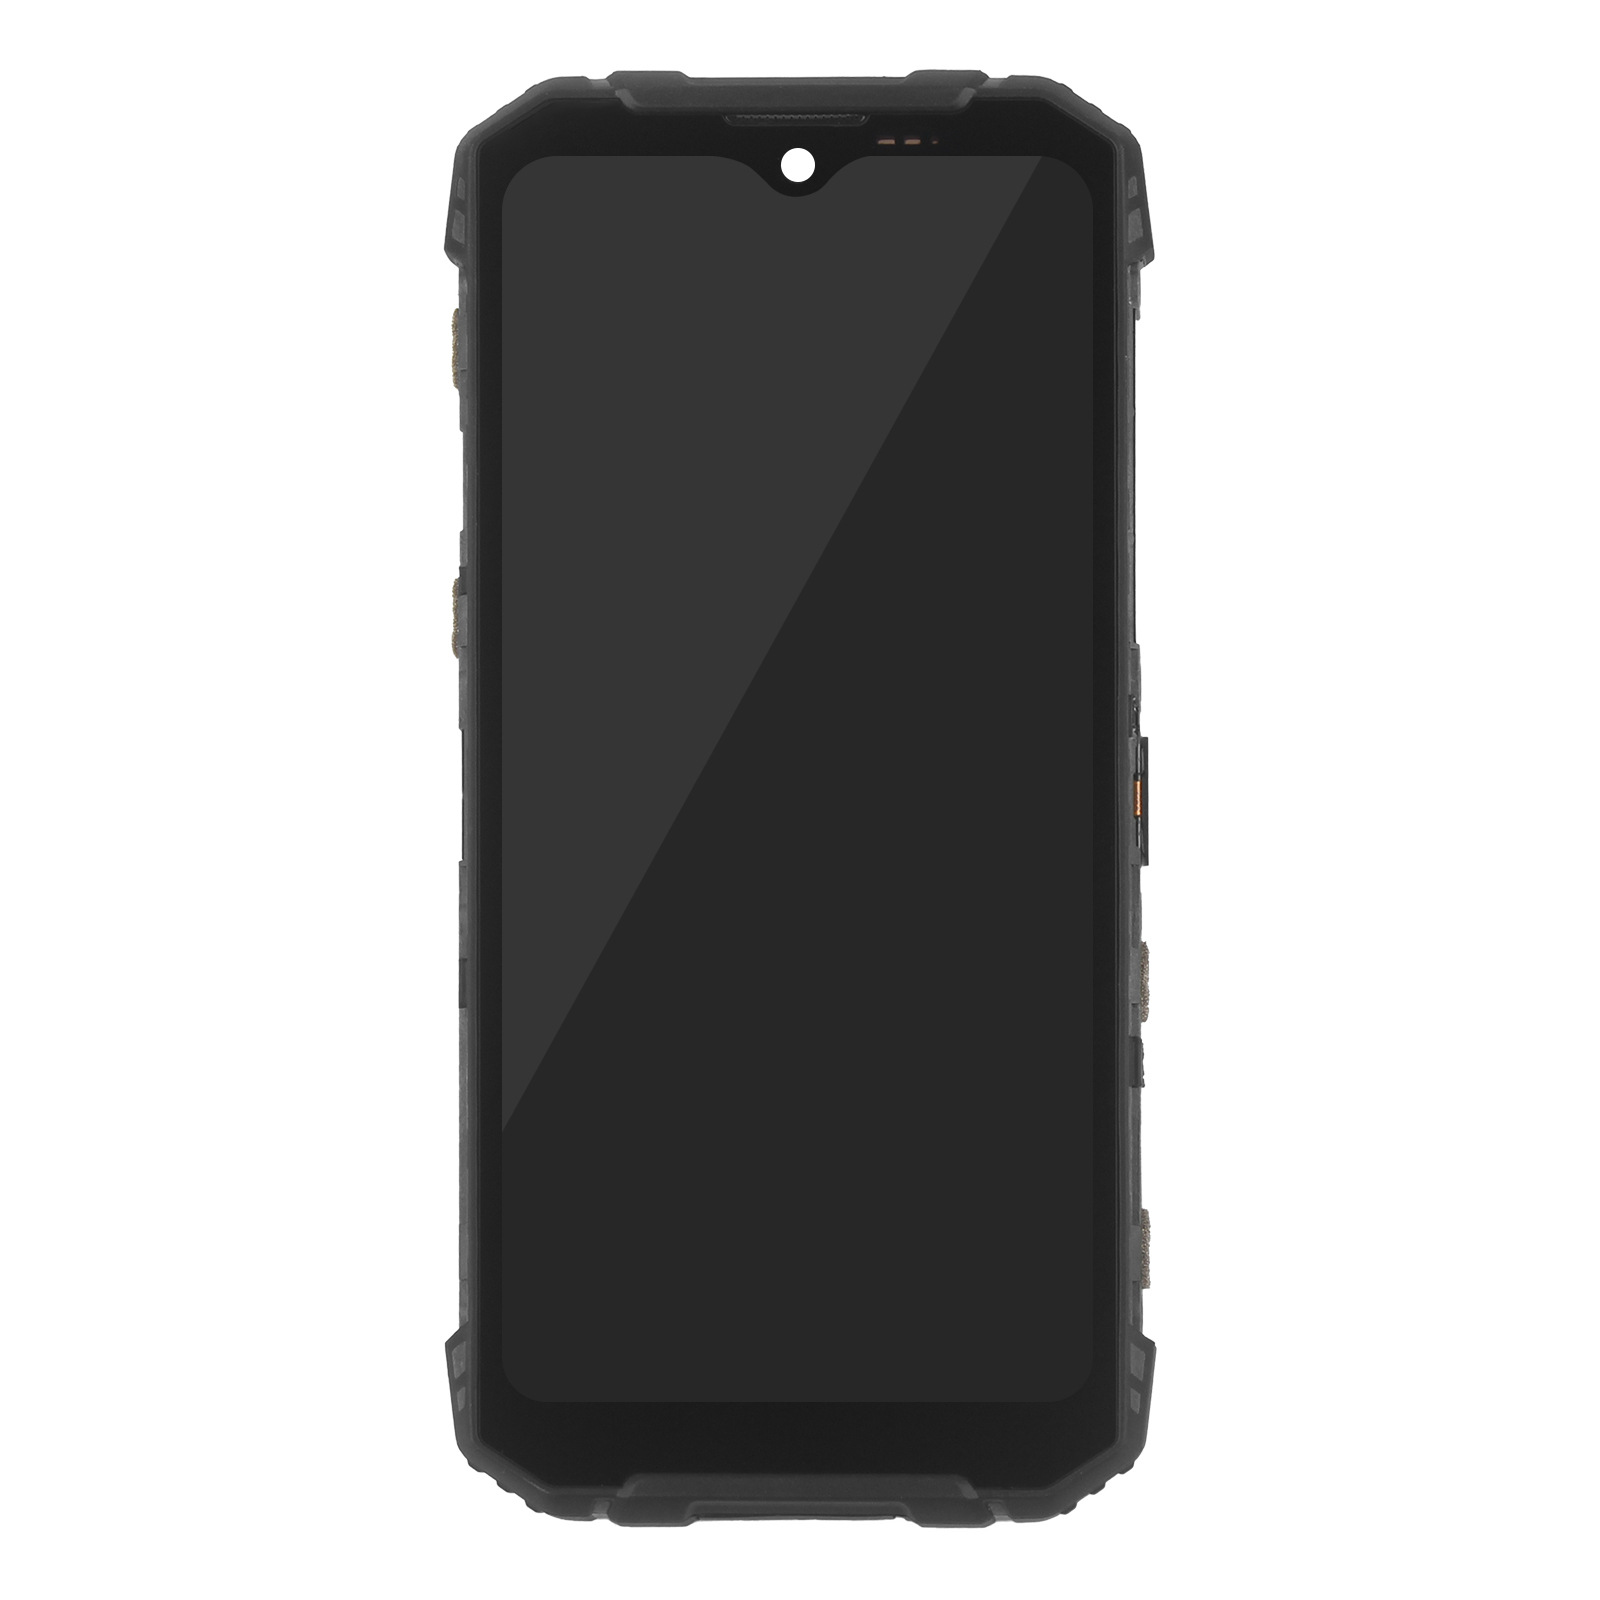 DOOGEE-Original-for-Doogee-S96-Pro-LCD-Display--Touch-Screen-Digitizer-Assembly-Replacement-Parts-wi-1868571-8